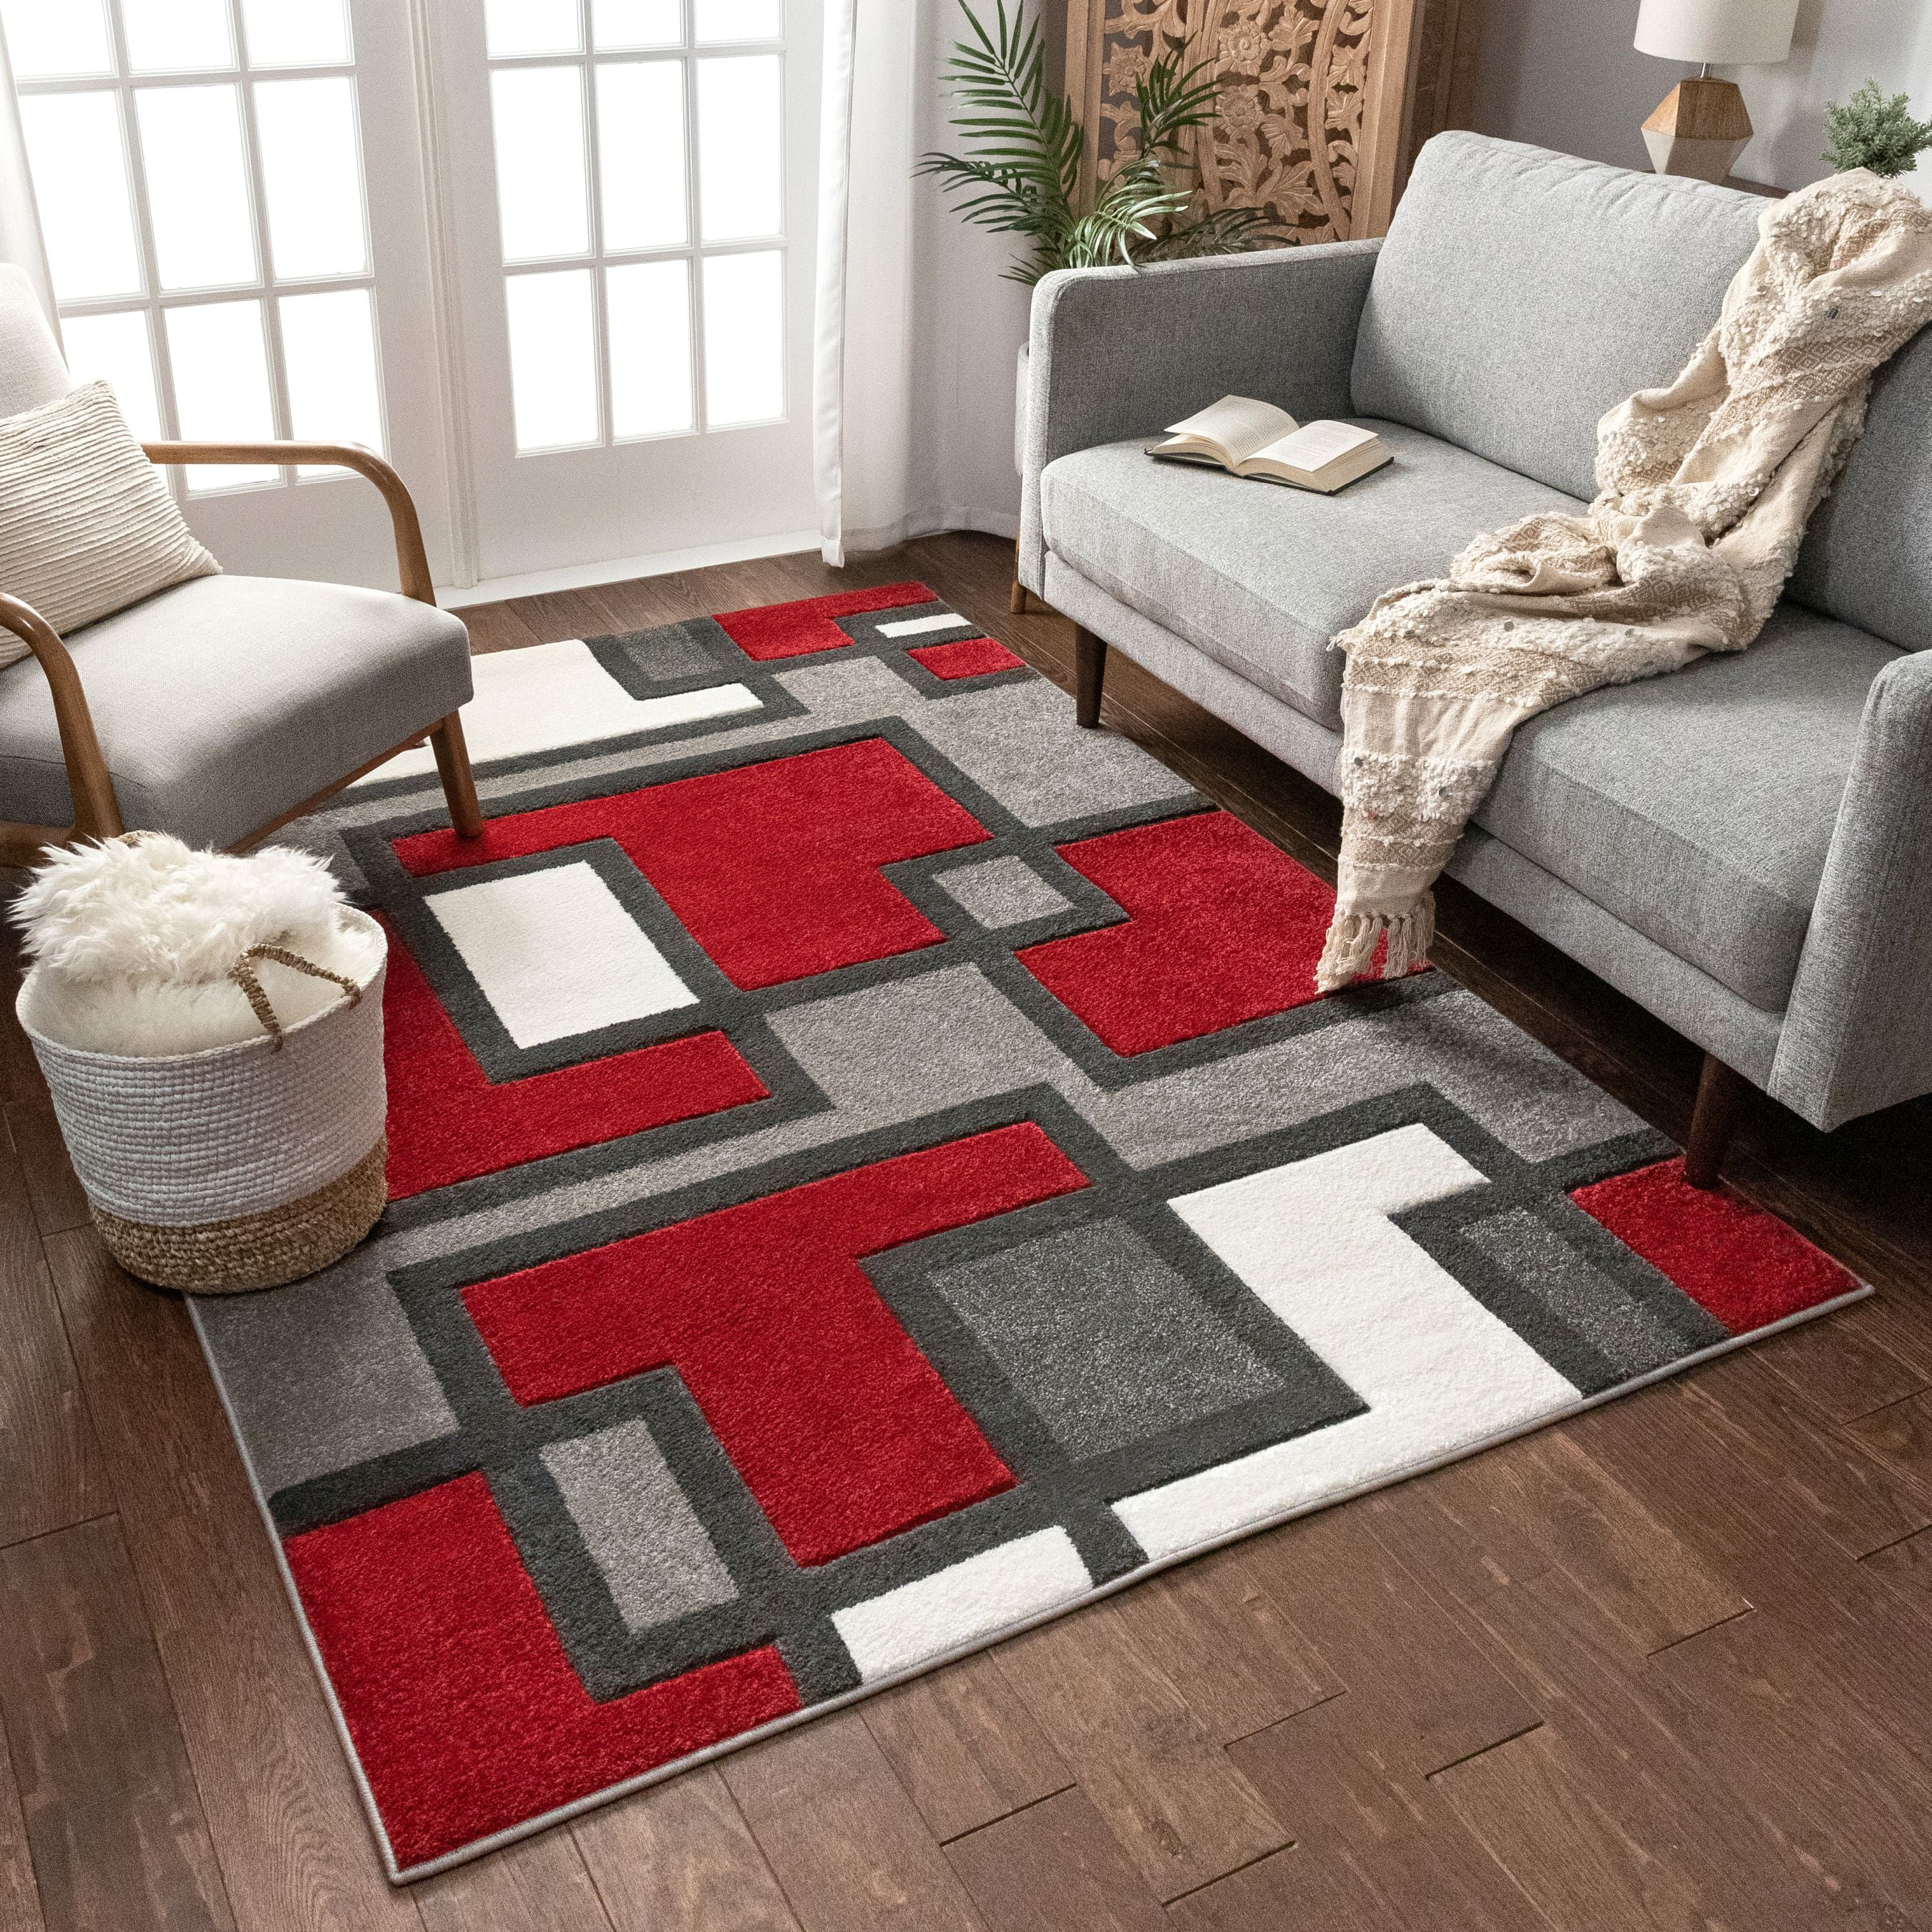 Well Woven Ruby Geometric Traditional, Red Contemporary Rugs